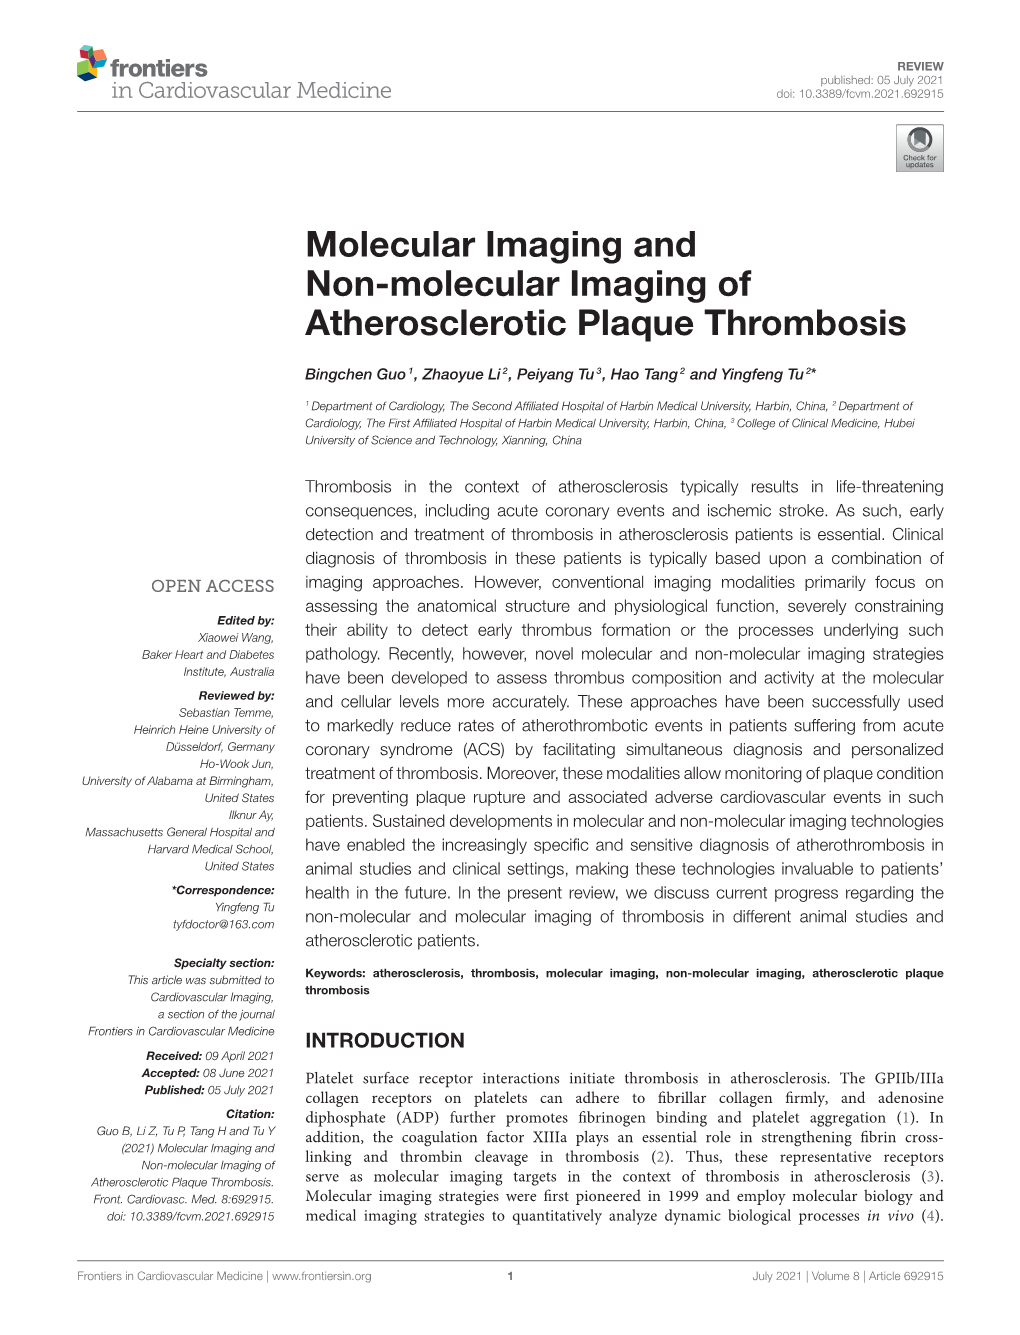 Molecular Imaging and Non-Molecular Imaging of Atherosclerotic Plaque Thrombosis